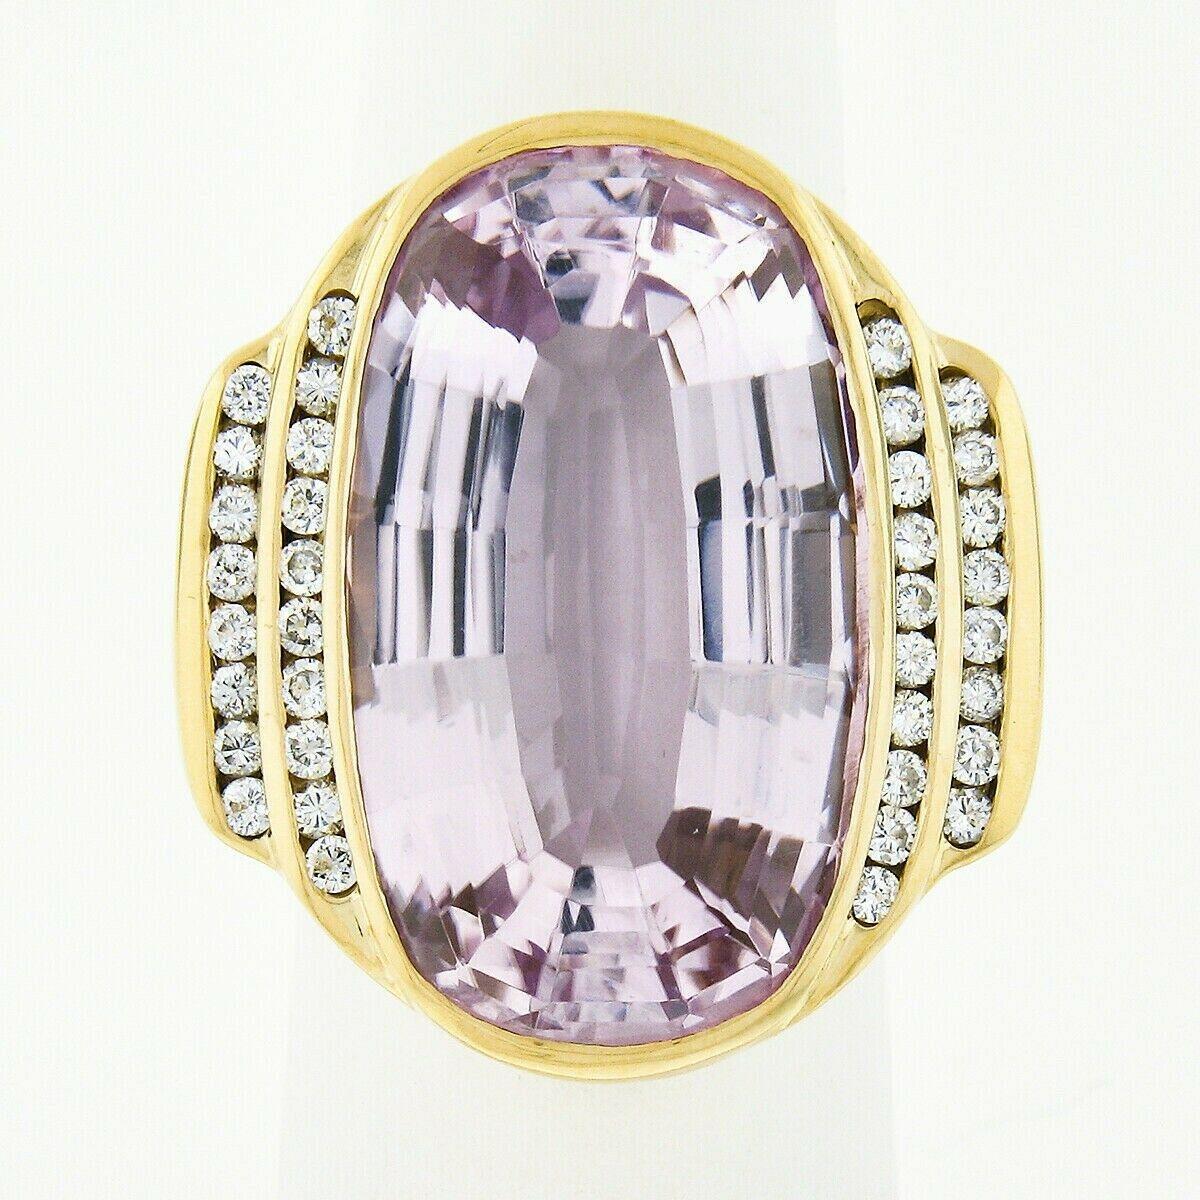 This breathtaking kunzite and diamond cocktail statement ring is crafted in solid 18k yellow gold and features an absolutely magnificent natural kunzite stone neatly bezel set at its center. This very large solitaire has a cushiony-oval step cut,